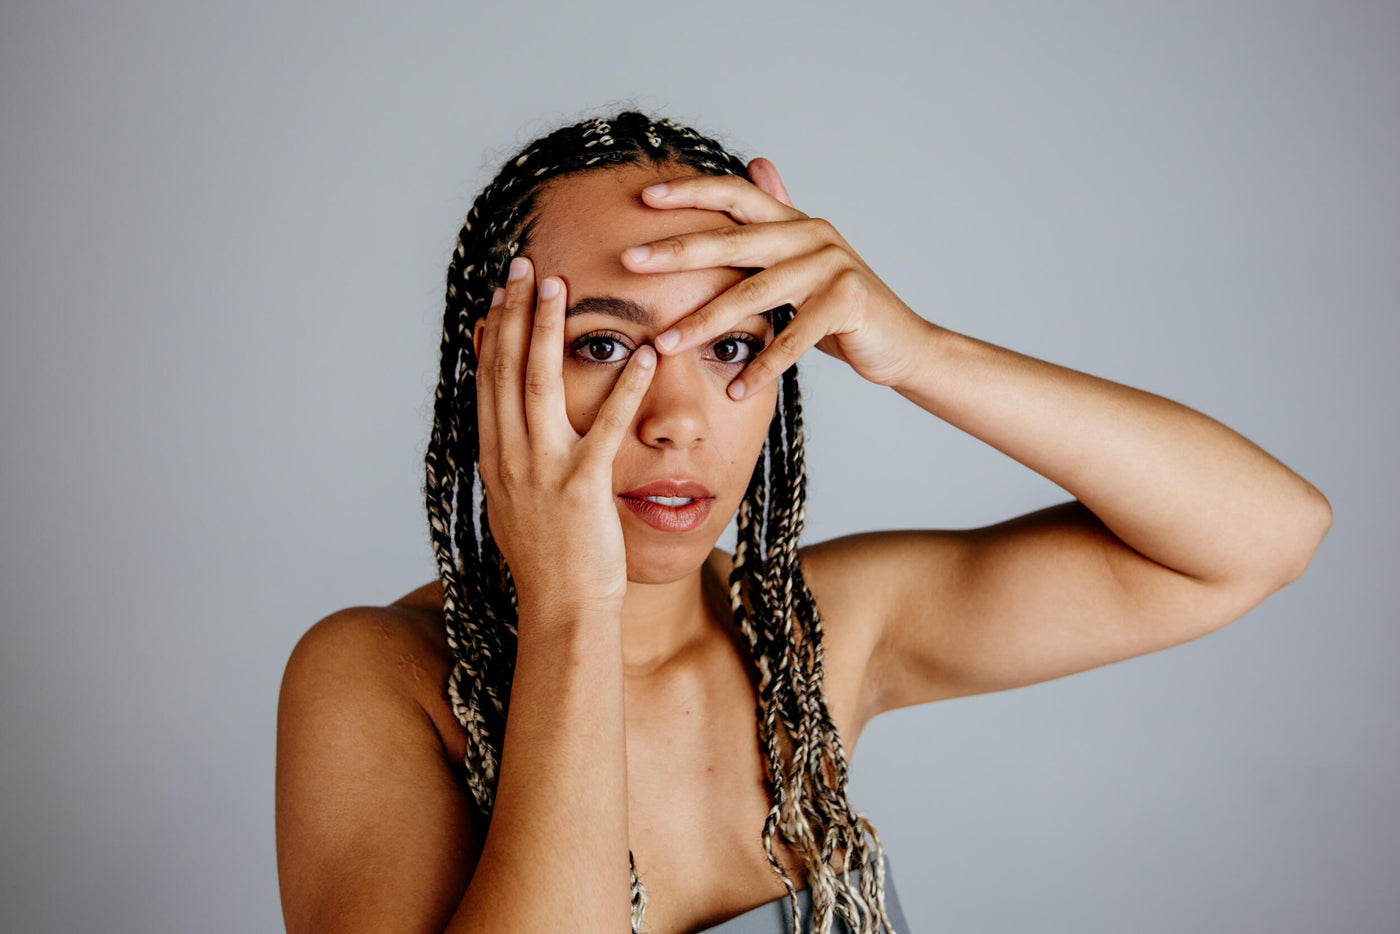 Woman is holding her hands near her face and has braided long hair